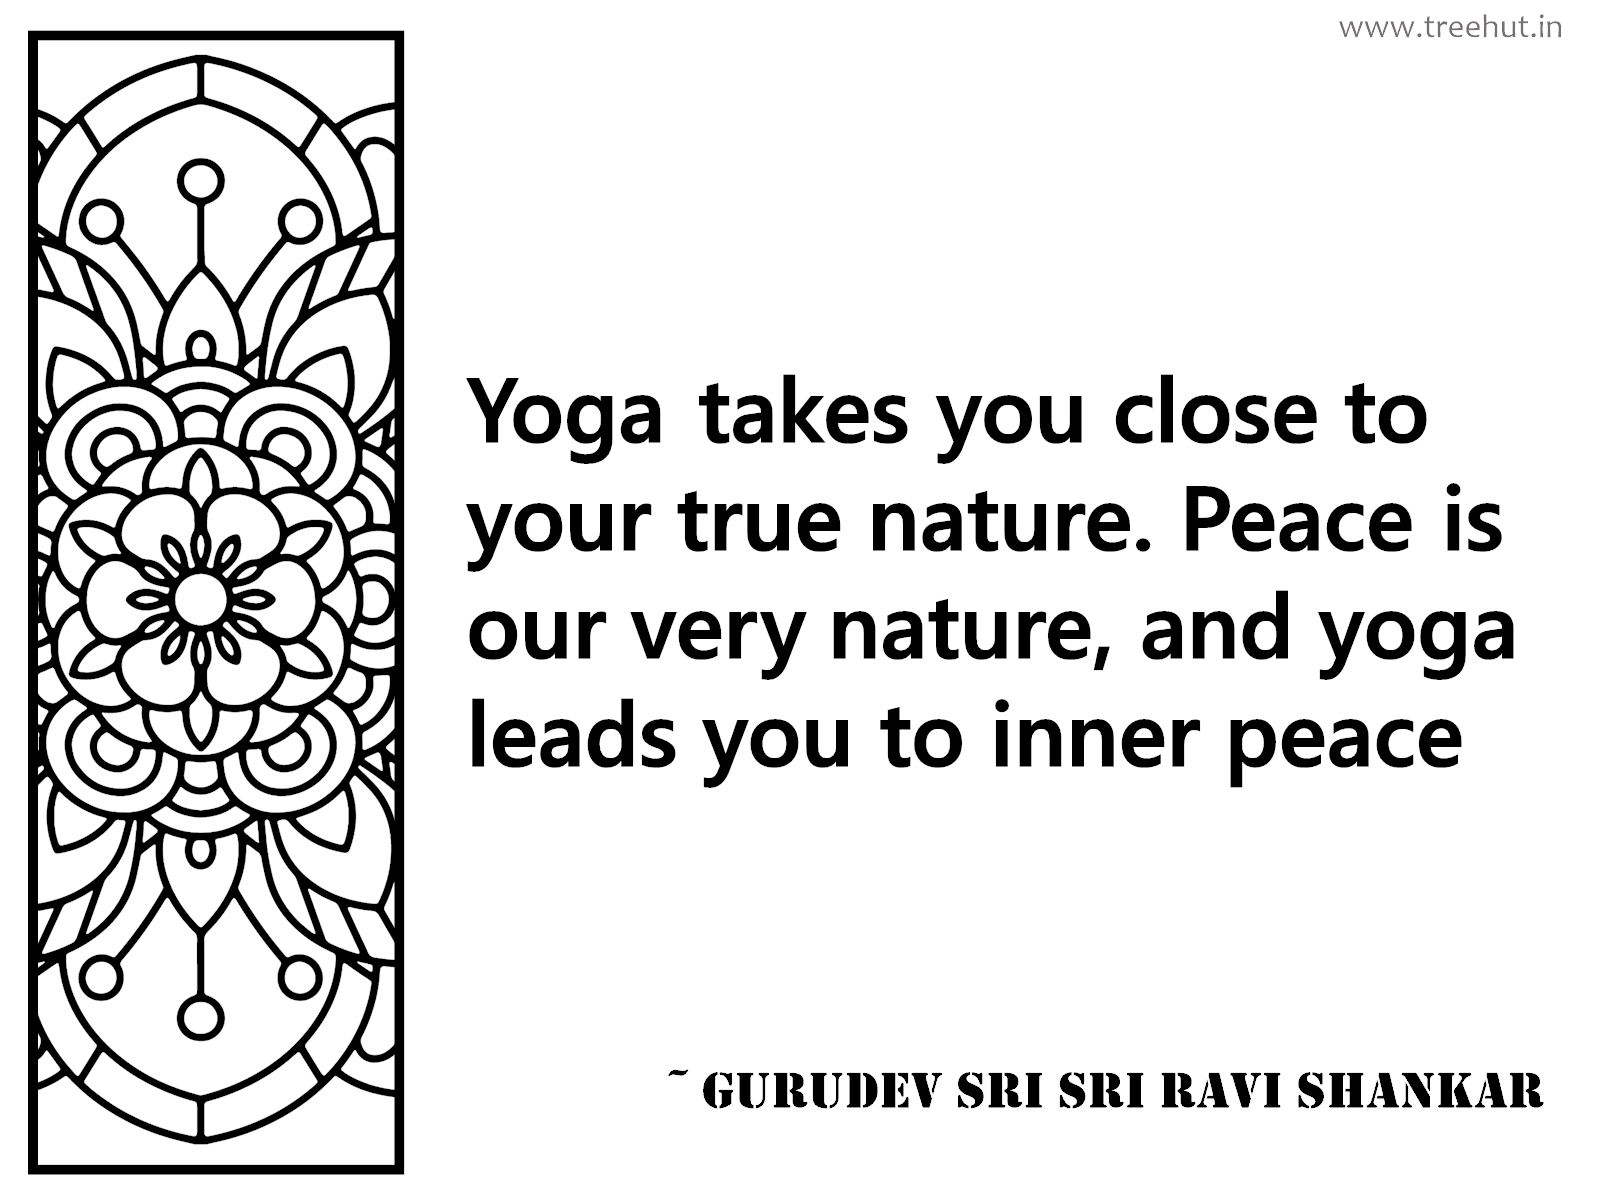 Yoga takes you close to your true nature. Peace is our very nature, and yoga leads you to inner peace Inspirational Quote by Gurudev Sri Sri Ravi Shankar, coloring pages